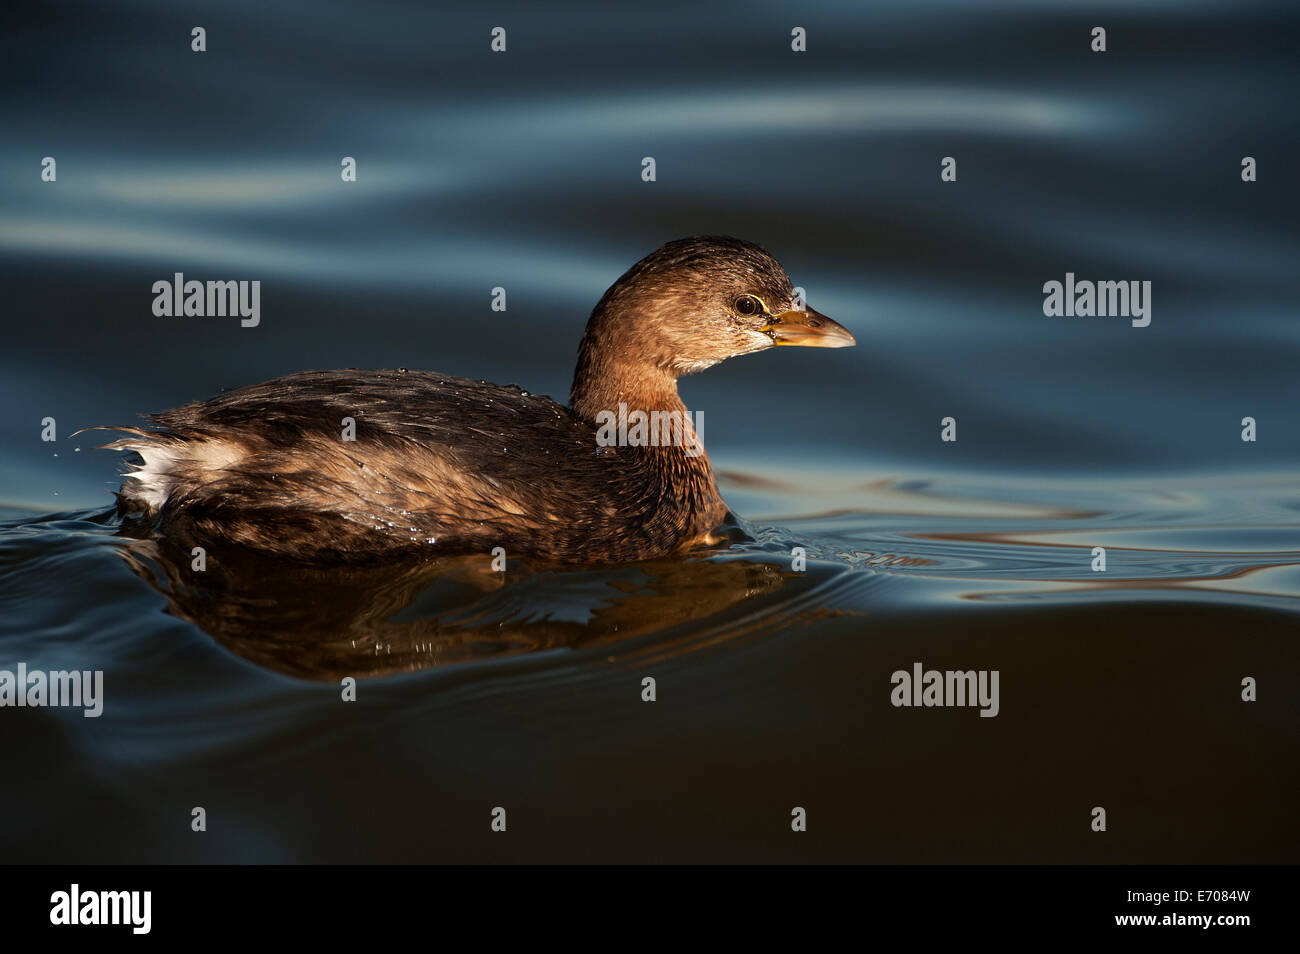 Pied-billed grebe on pond Stock Photo